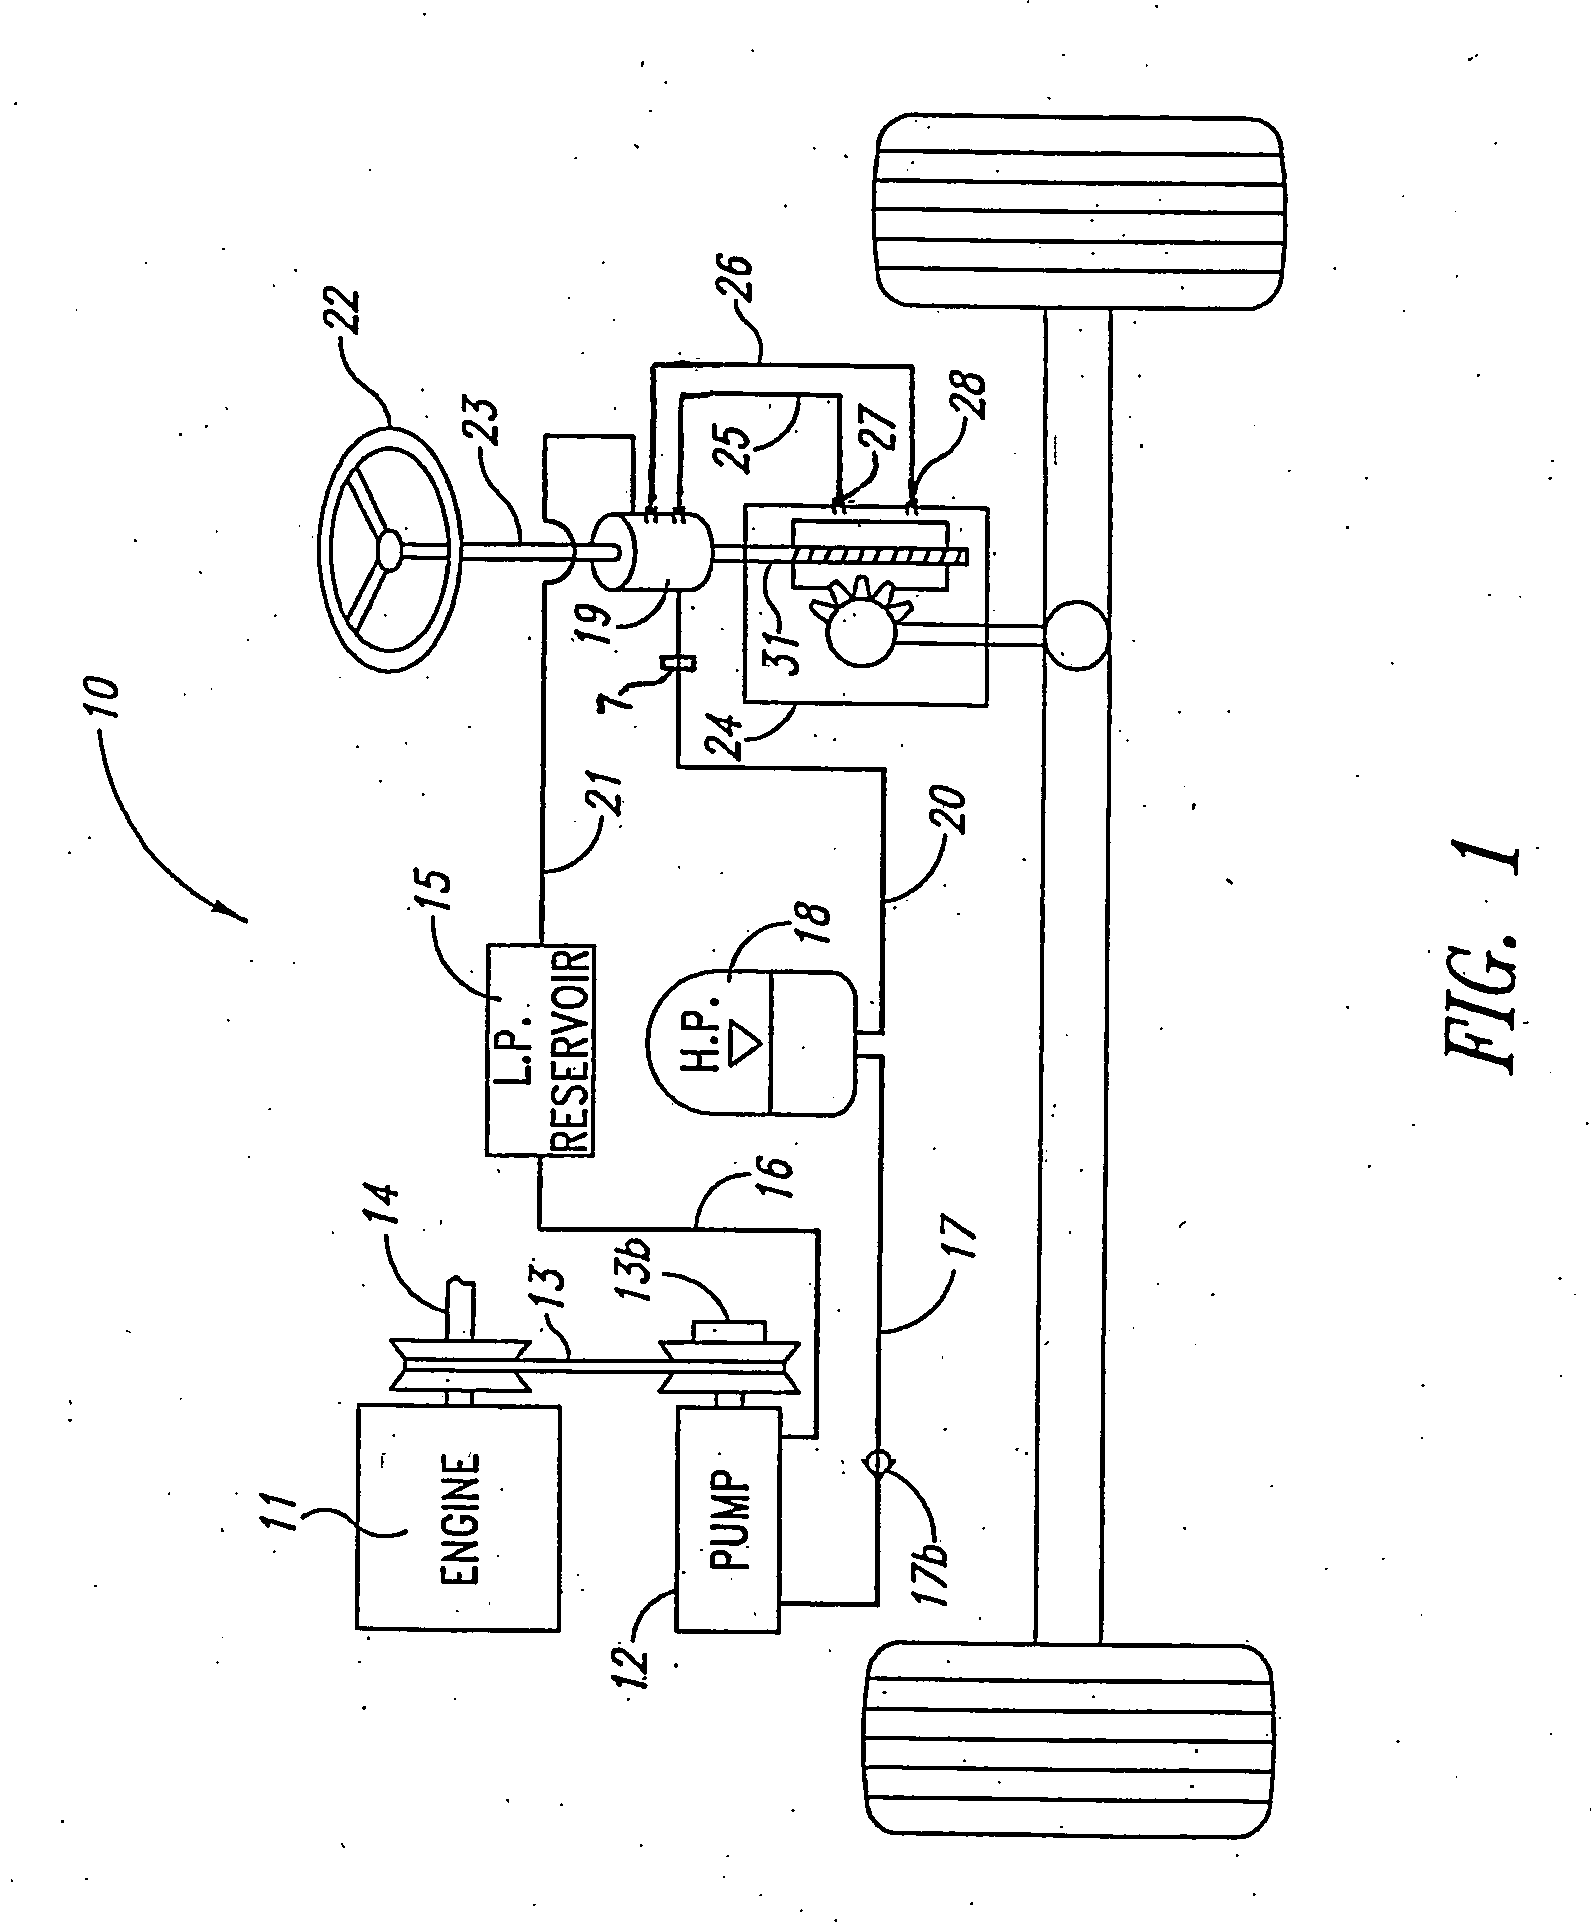 Engine-off power steering system